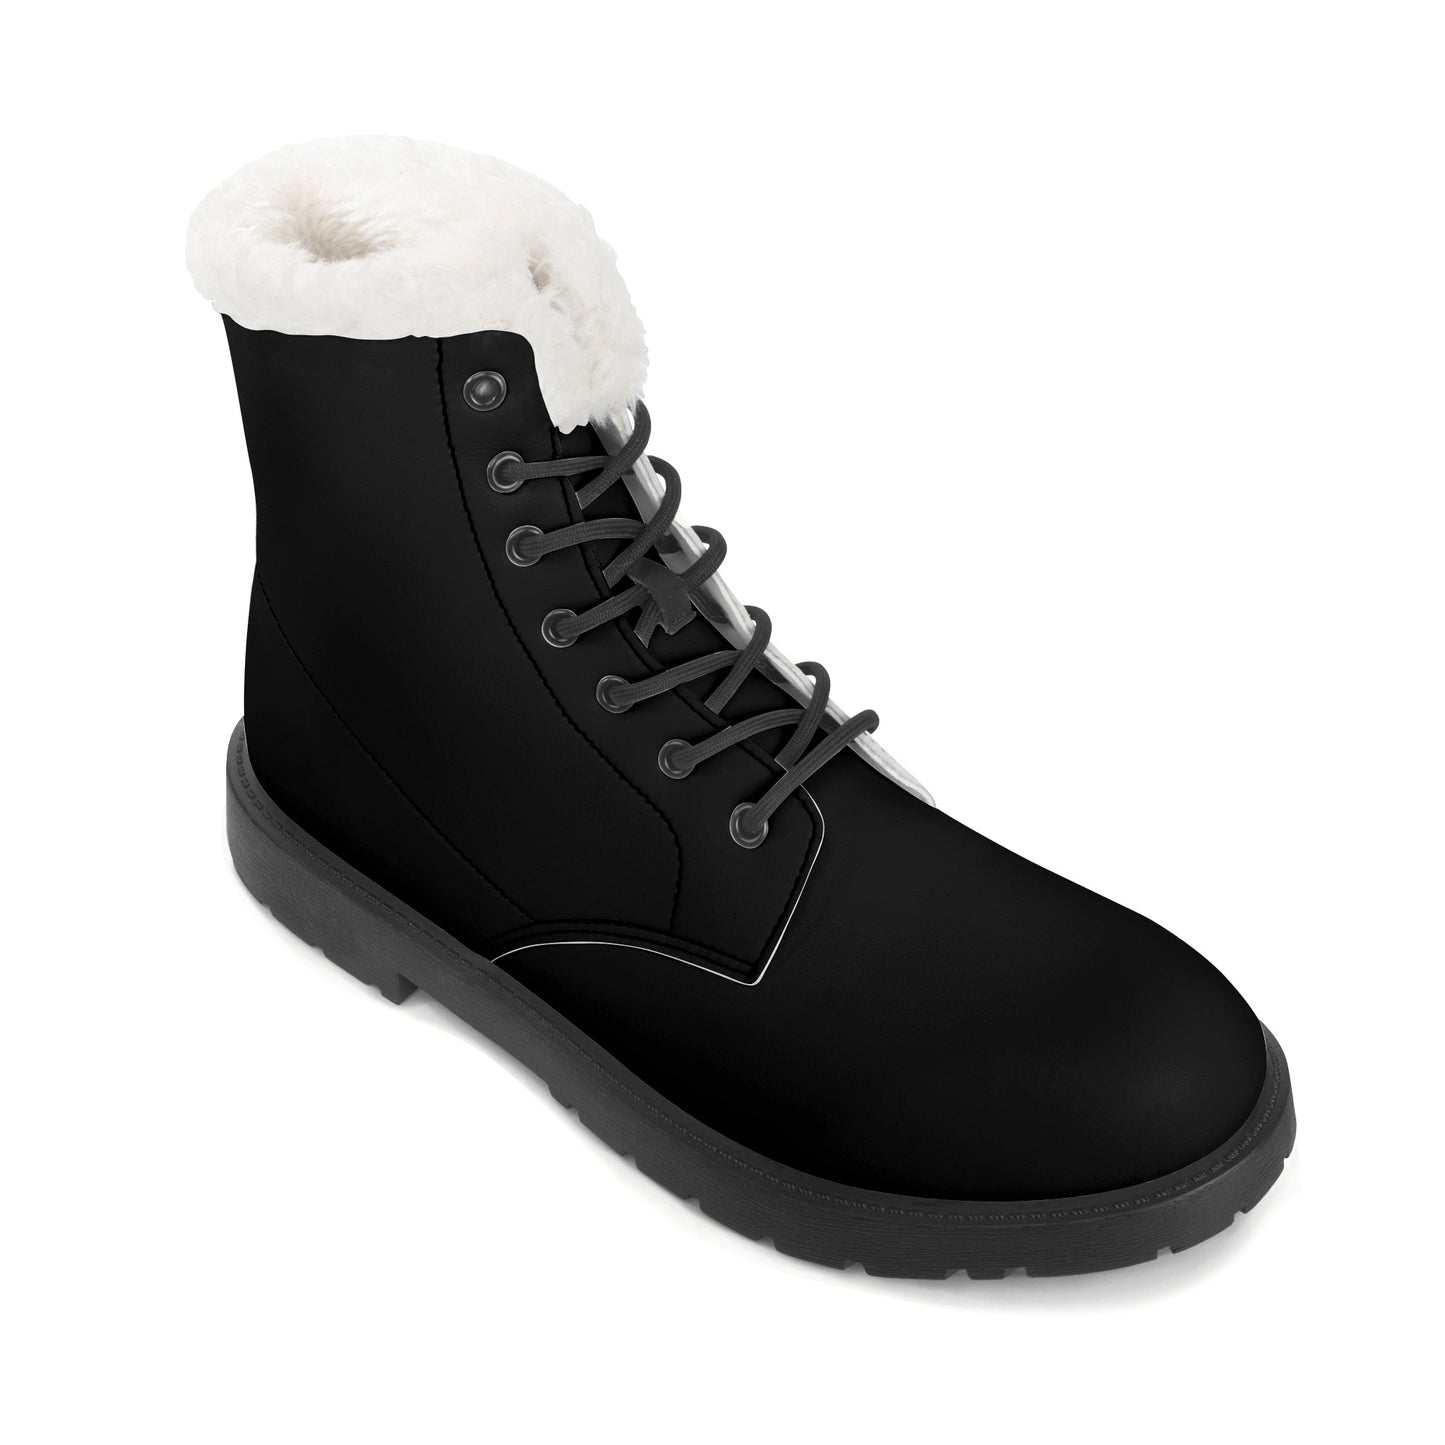 Black Men Fleece Lined Leather Boots, Vegan Faux Fur Lace Up Shoes Hiking Festival Ankle Combat Work Winter Waterproof Custom Starcove Fashion